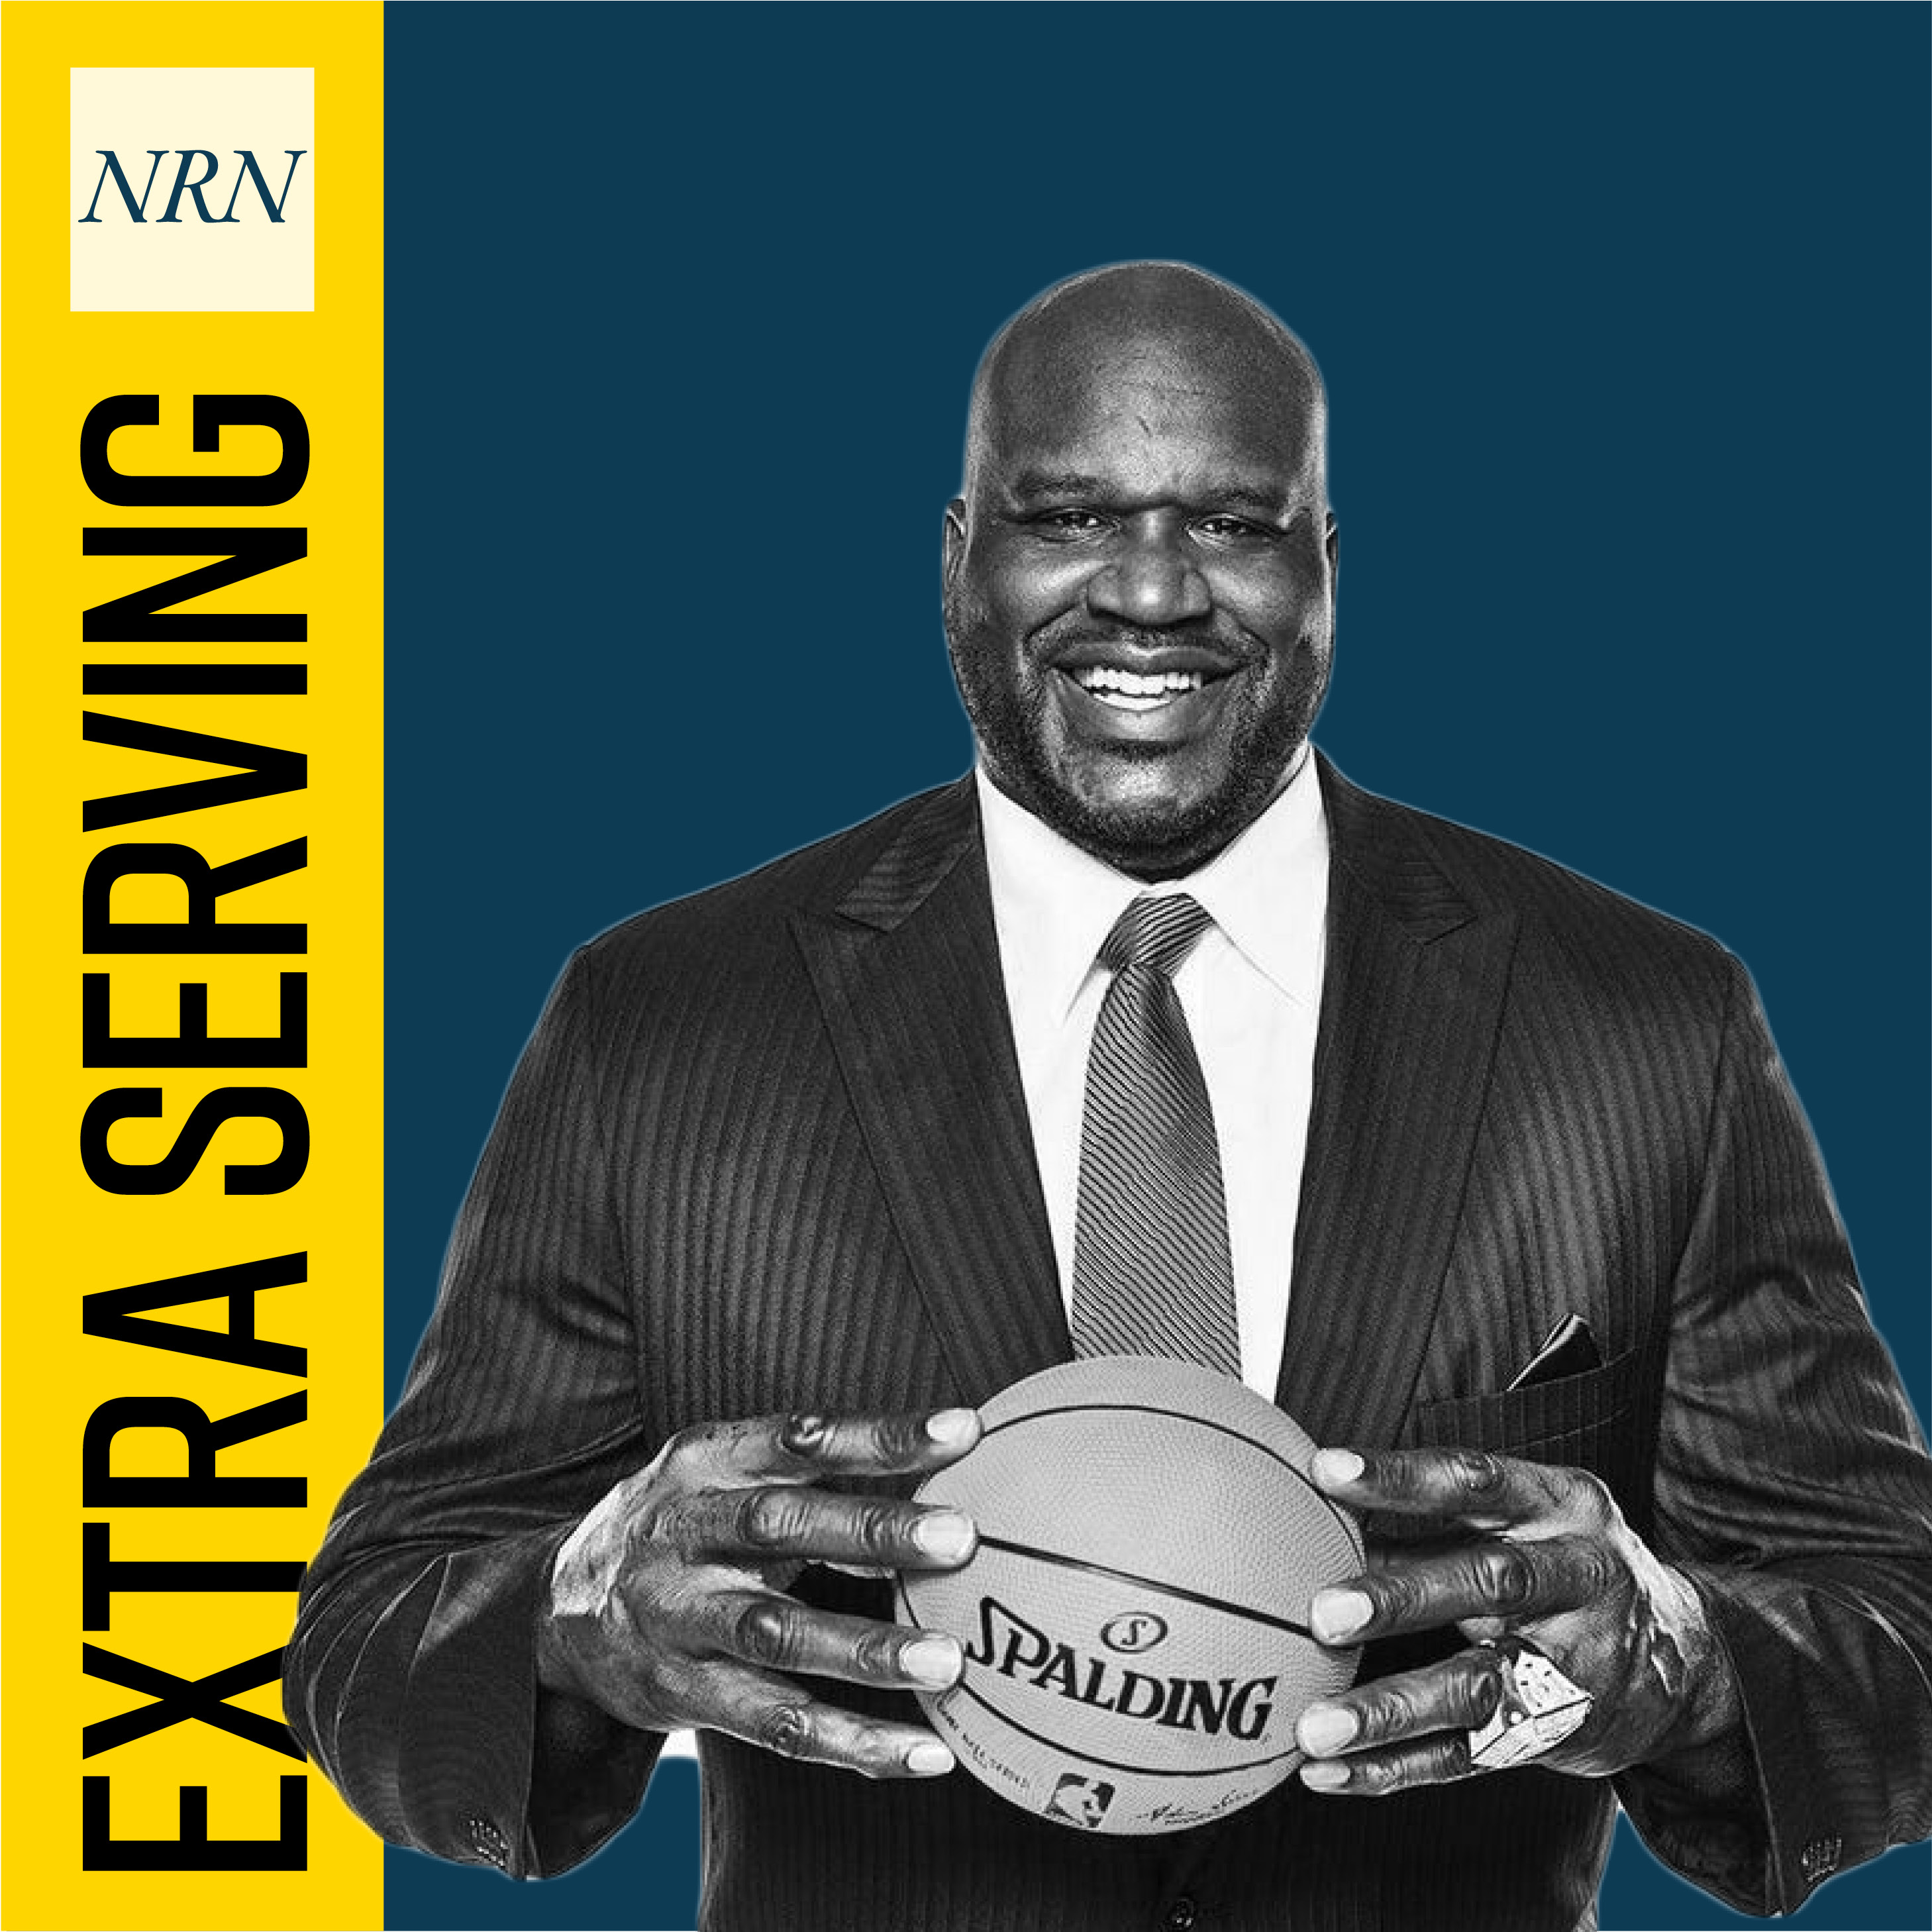 Shaquille O’Neal and Josh Halpern of Big Chicken join Ron Ruggless to discuss franchising the new brand